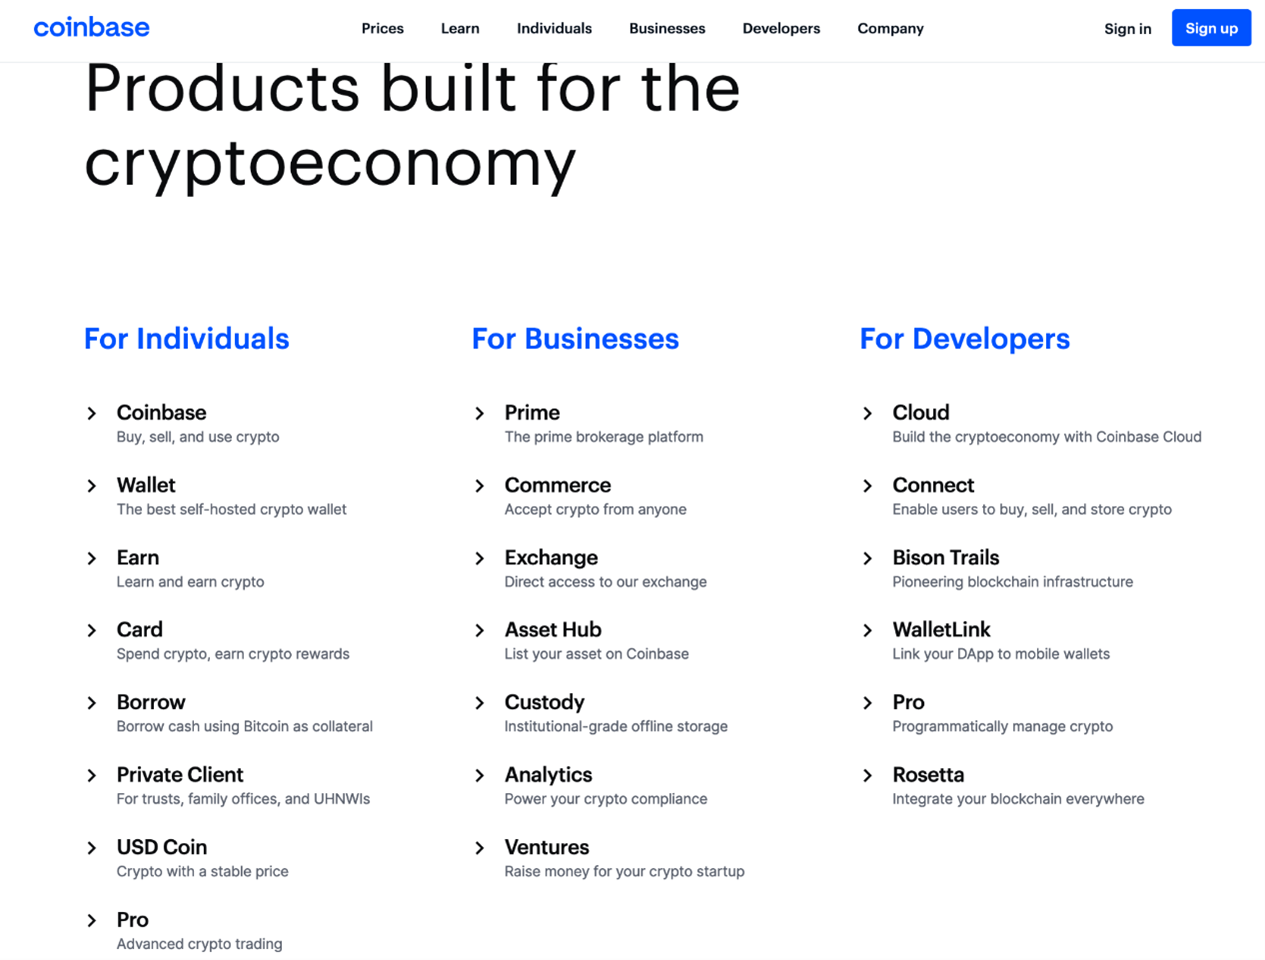 A website interface displaying three types of Coinbase's products